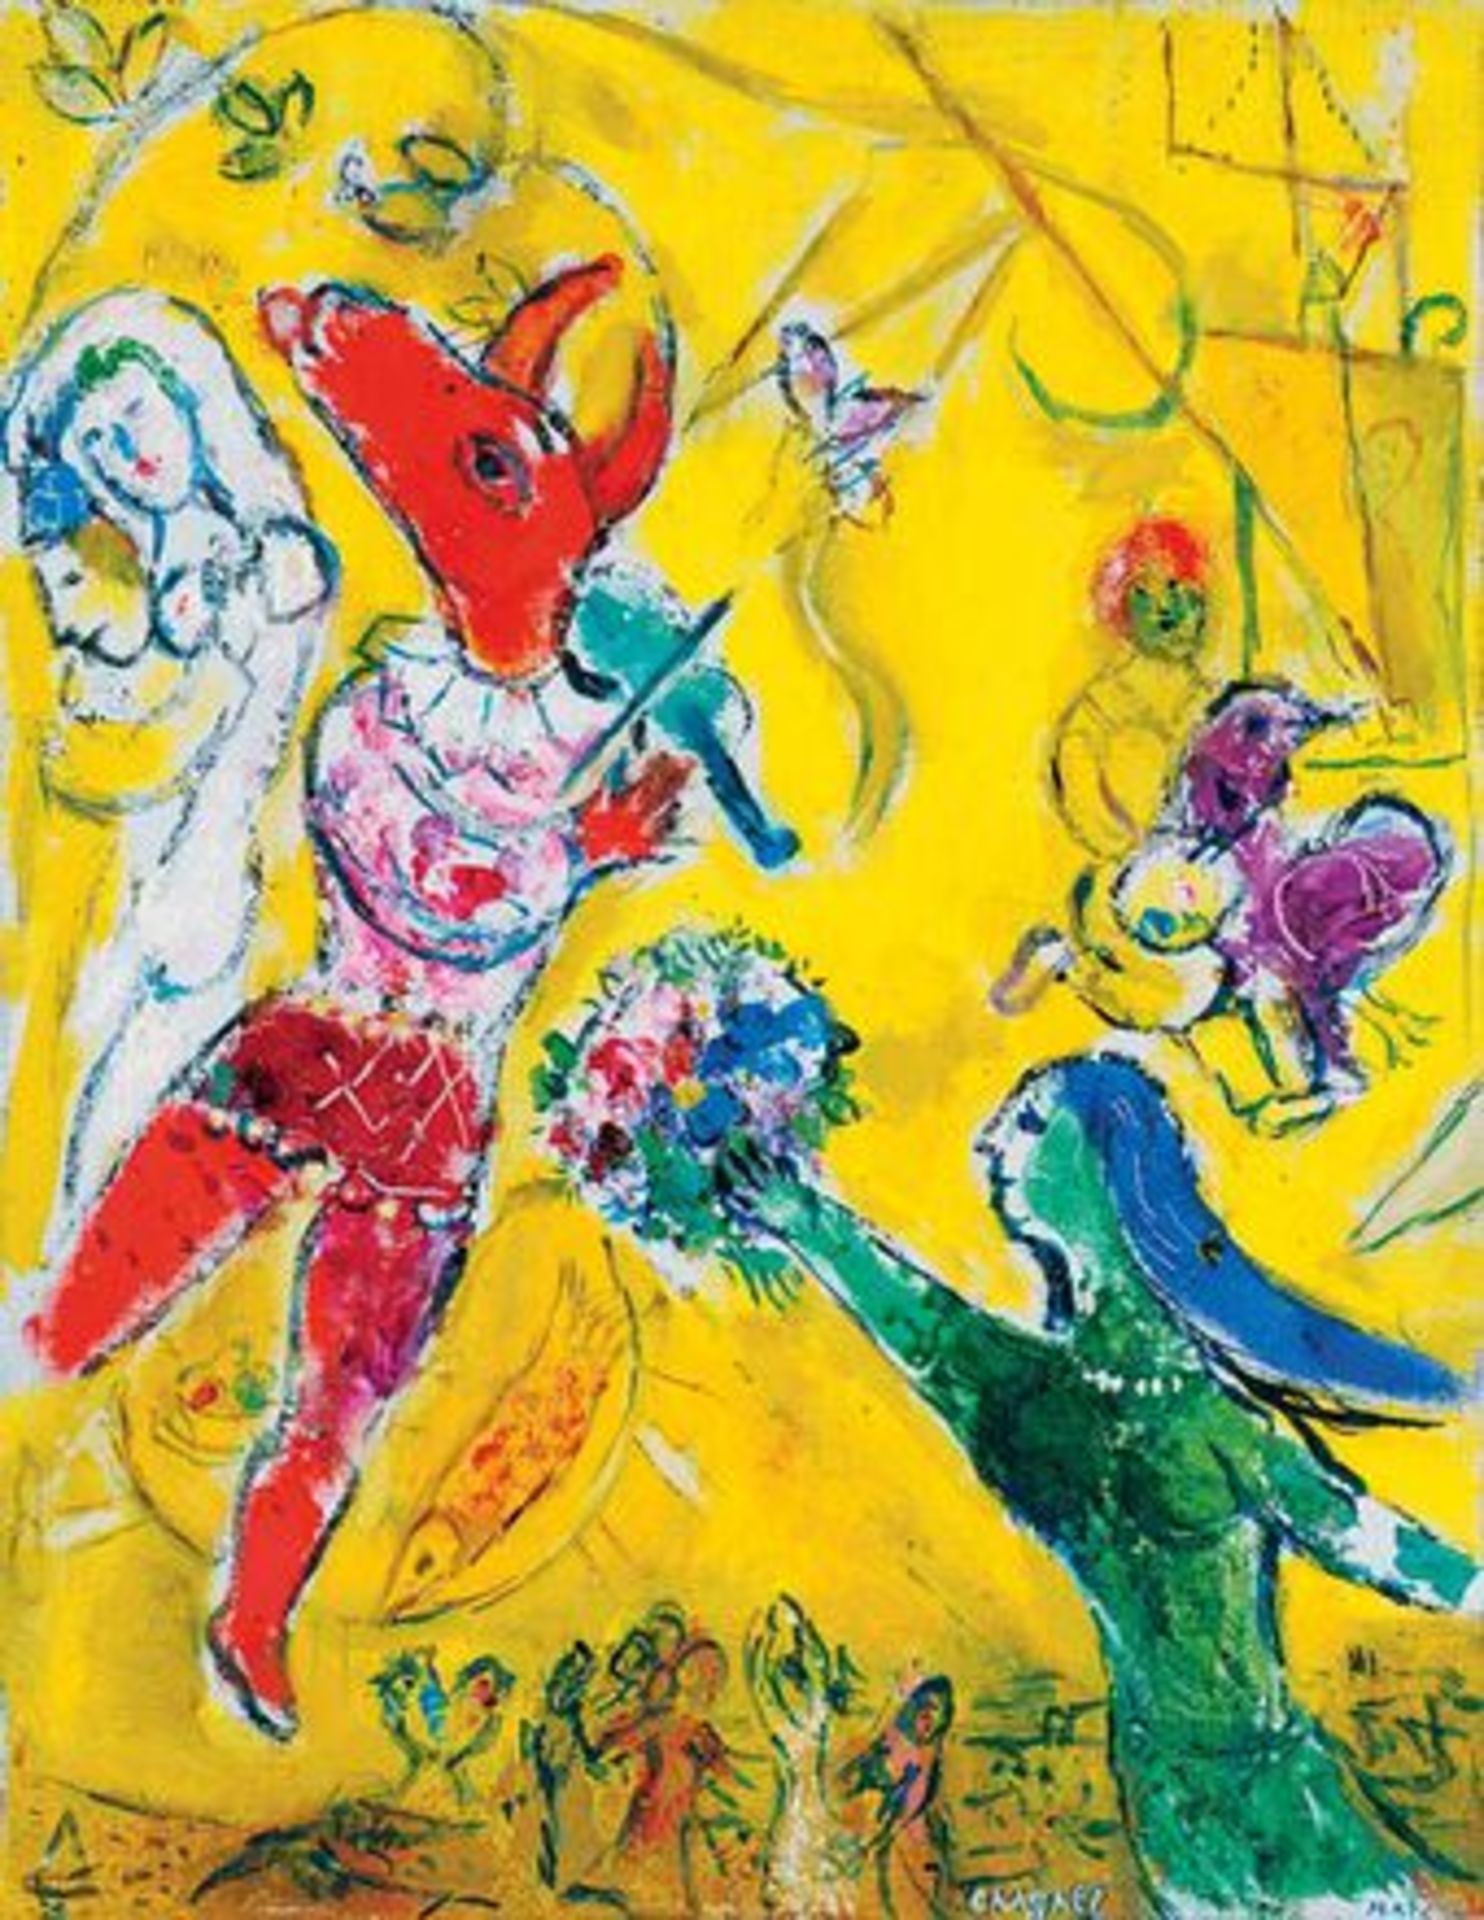 Marc Chagall "The Dance and the Circus, 1950" Offset Lithograph